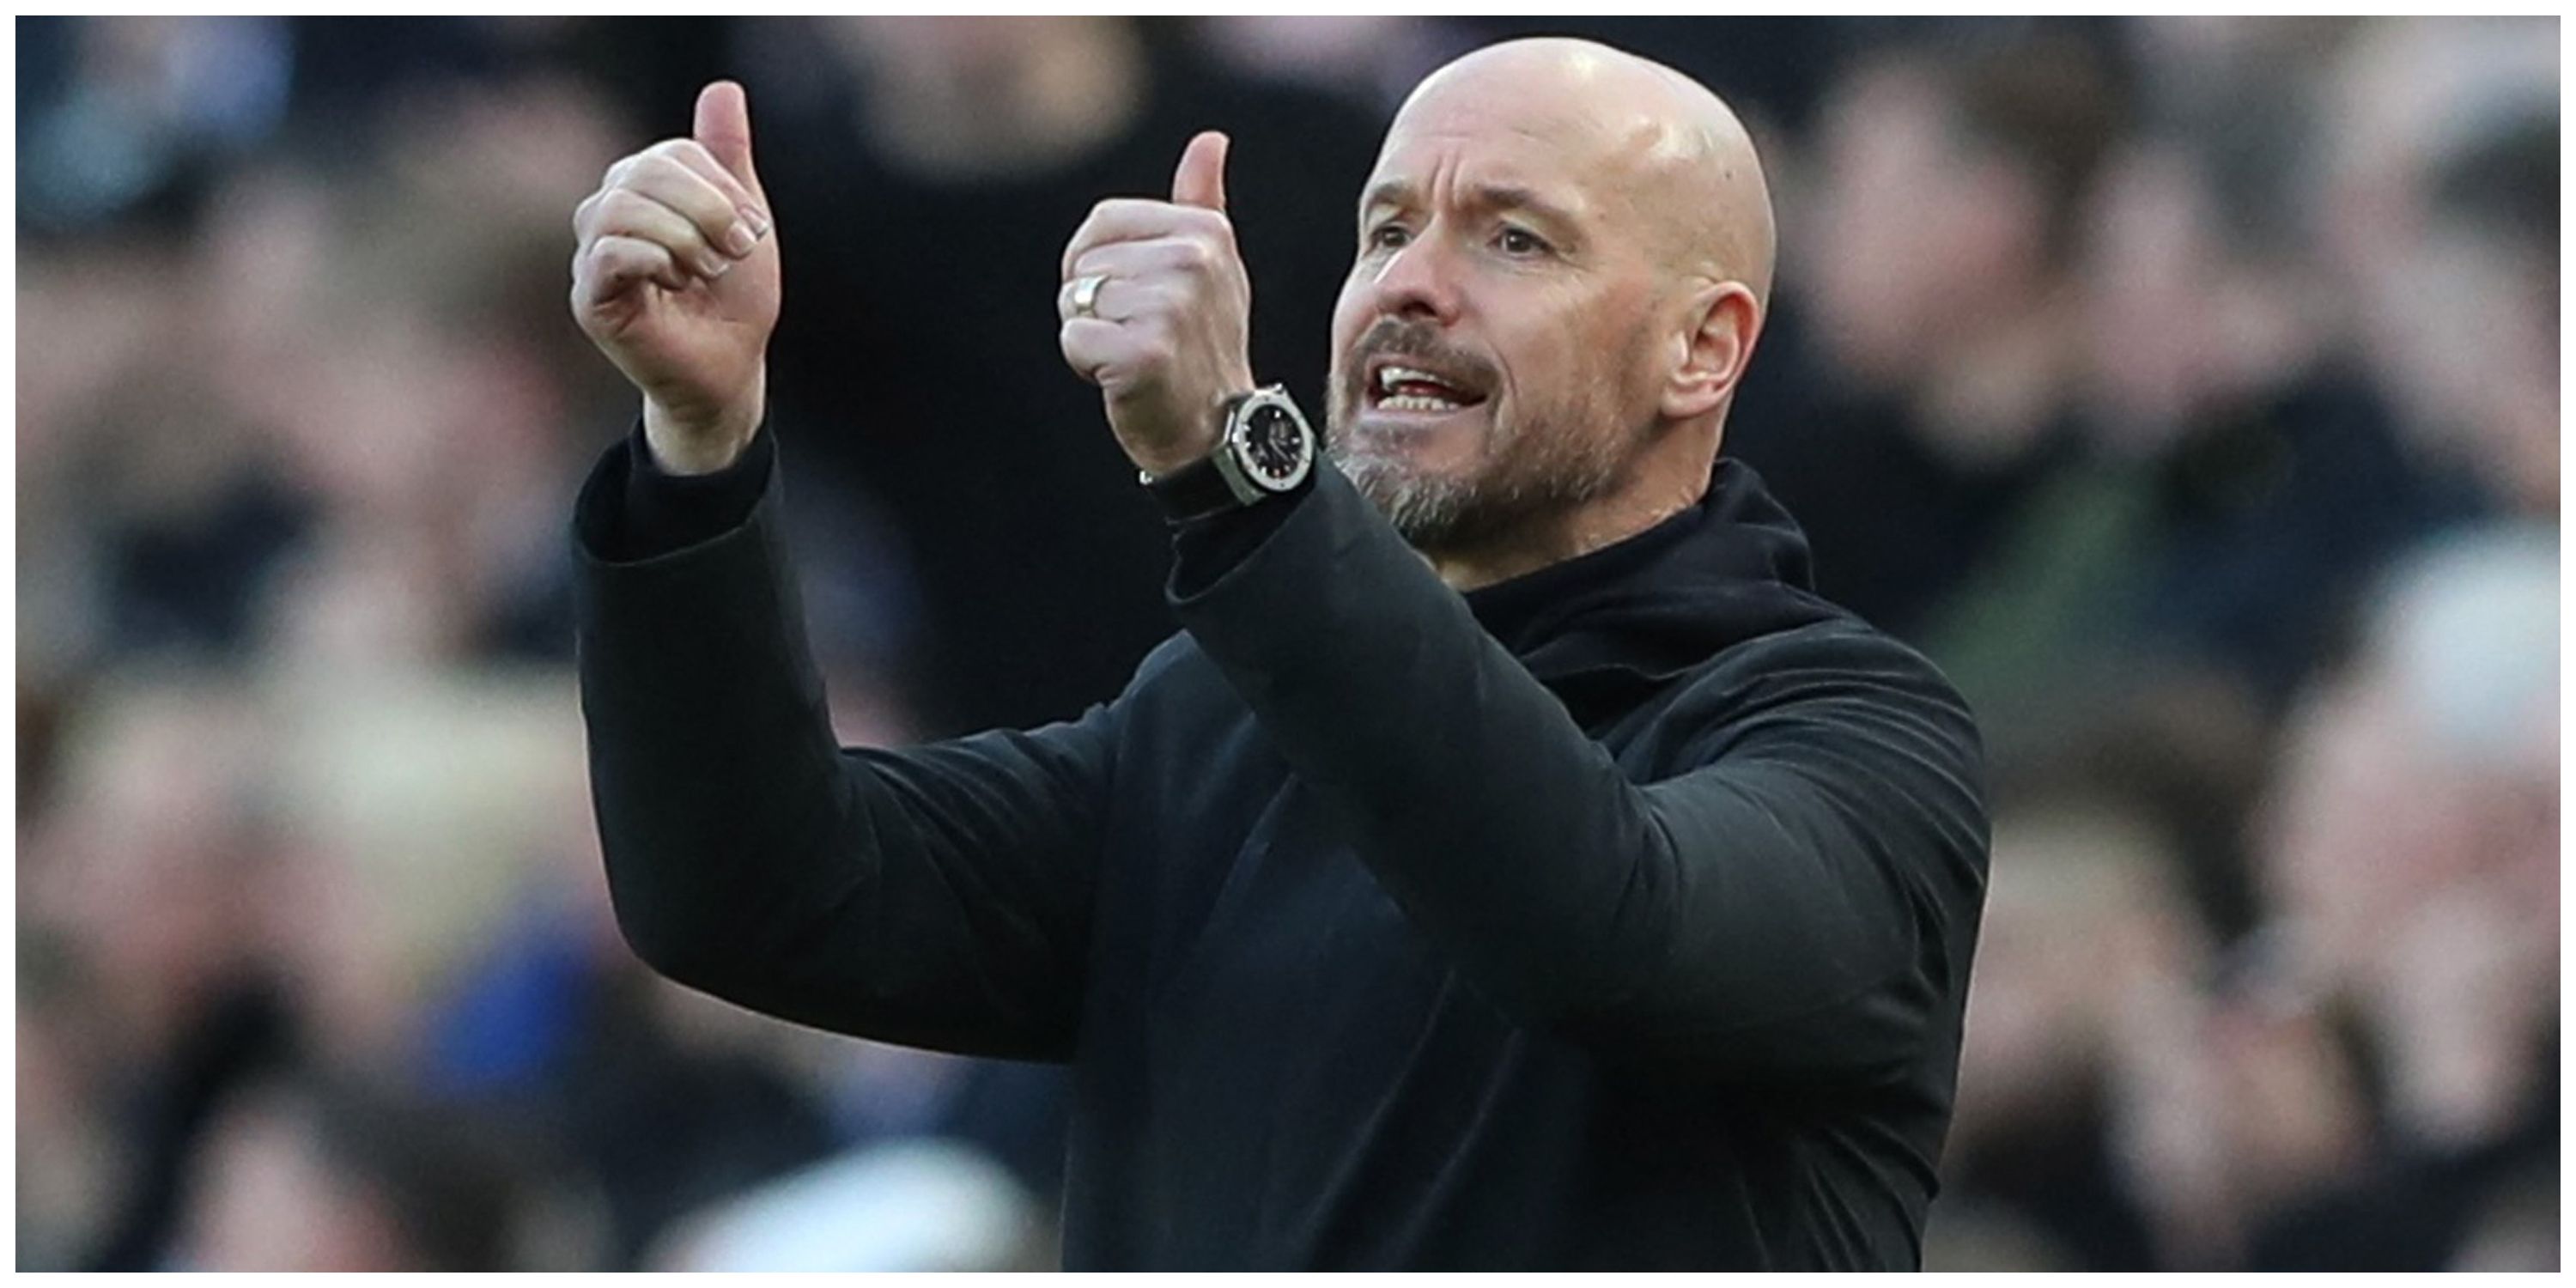 Manchester United manager Erik ten Hag giving thumbs up